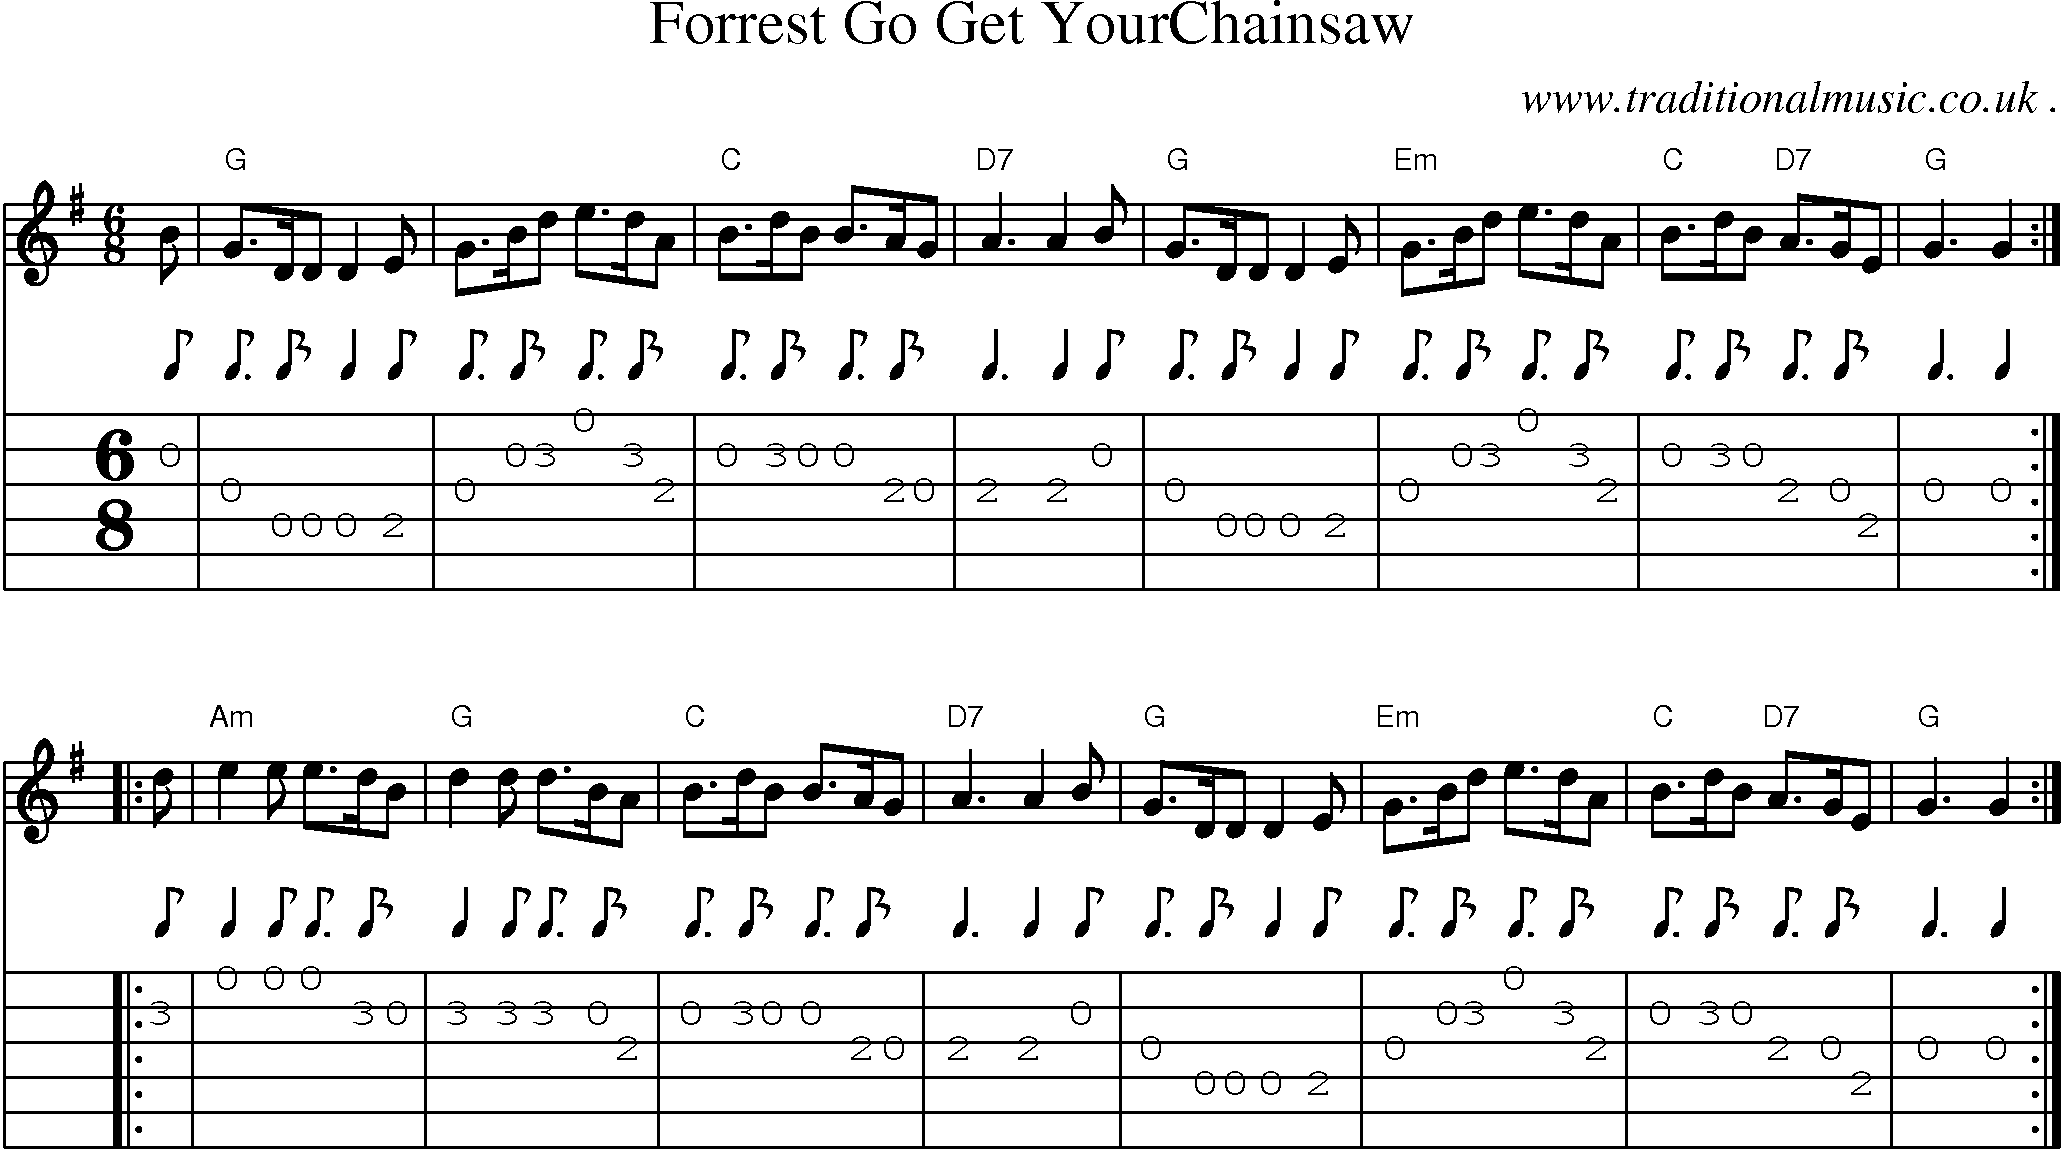 Sheet-music  score, Chords and Guitar Tabs for Forrest Go Get Yourchainsaw